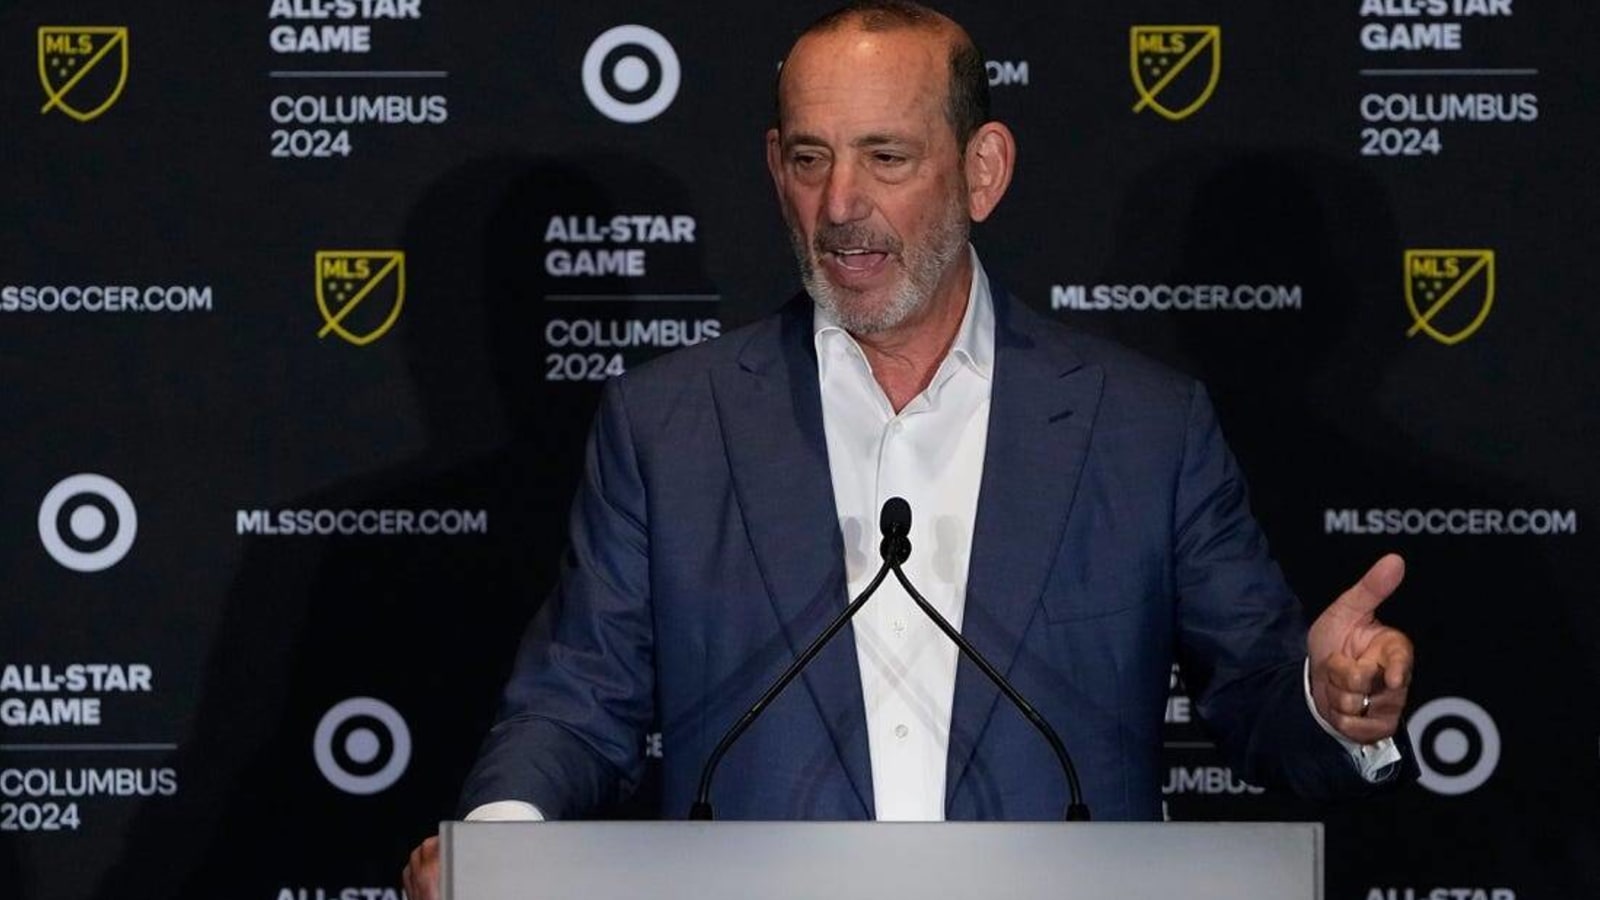 MLS commissioner not worried about emergence of Saudi league